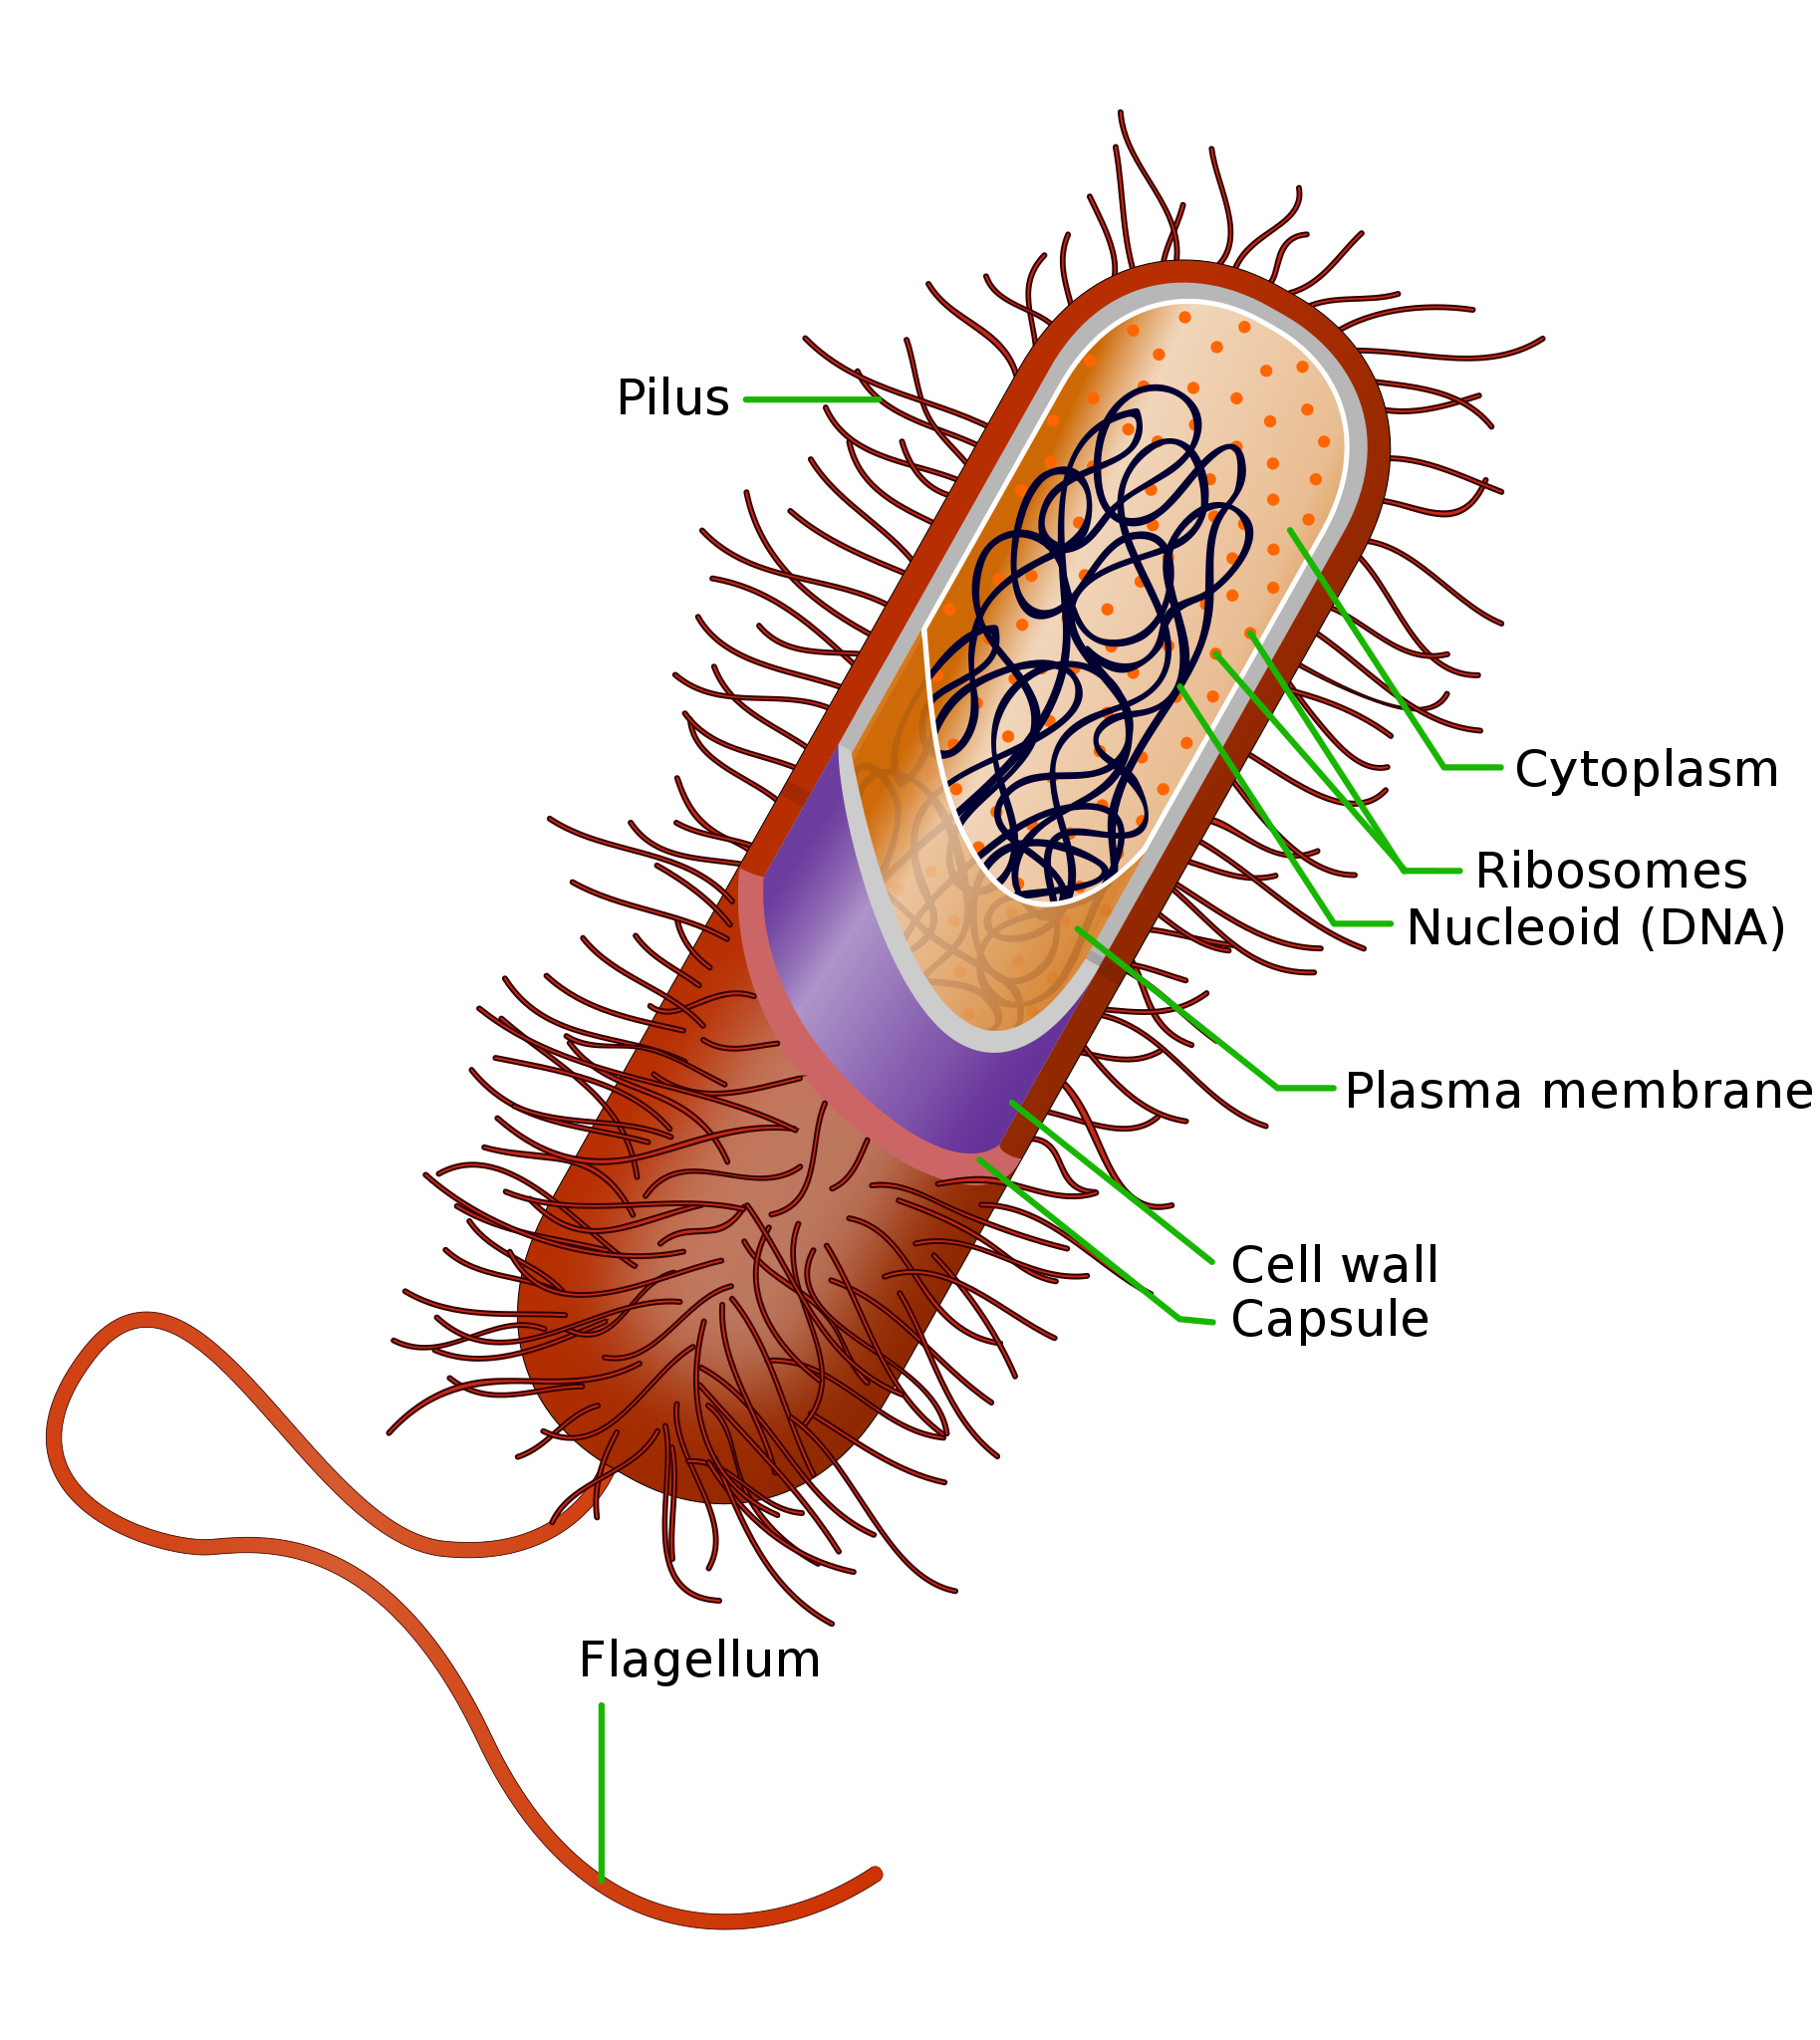 A cartoon of a prokaryotic cell. It is rod shaped with a single flagellum and many pili protruding from the cell membrane. The figure shows a cutaway to visualize the interior of the cell. Surrounding the interior from outside to inside are a capsule, a cell wall, and a plasma membrane. Within the cell is cytoplasm. The cytoplasm contains ribosomes and DNA.